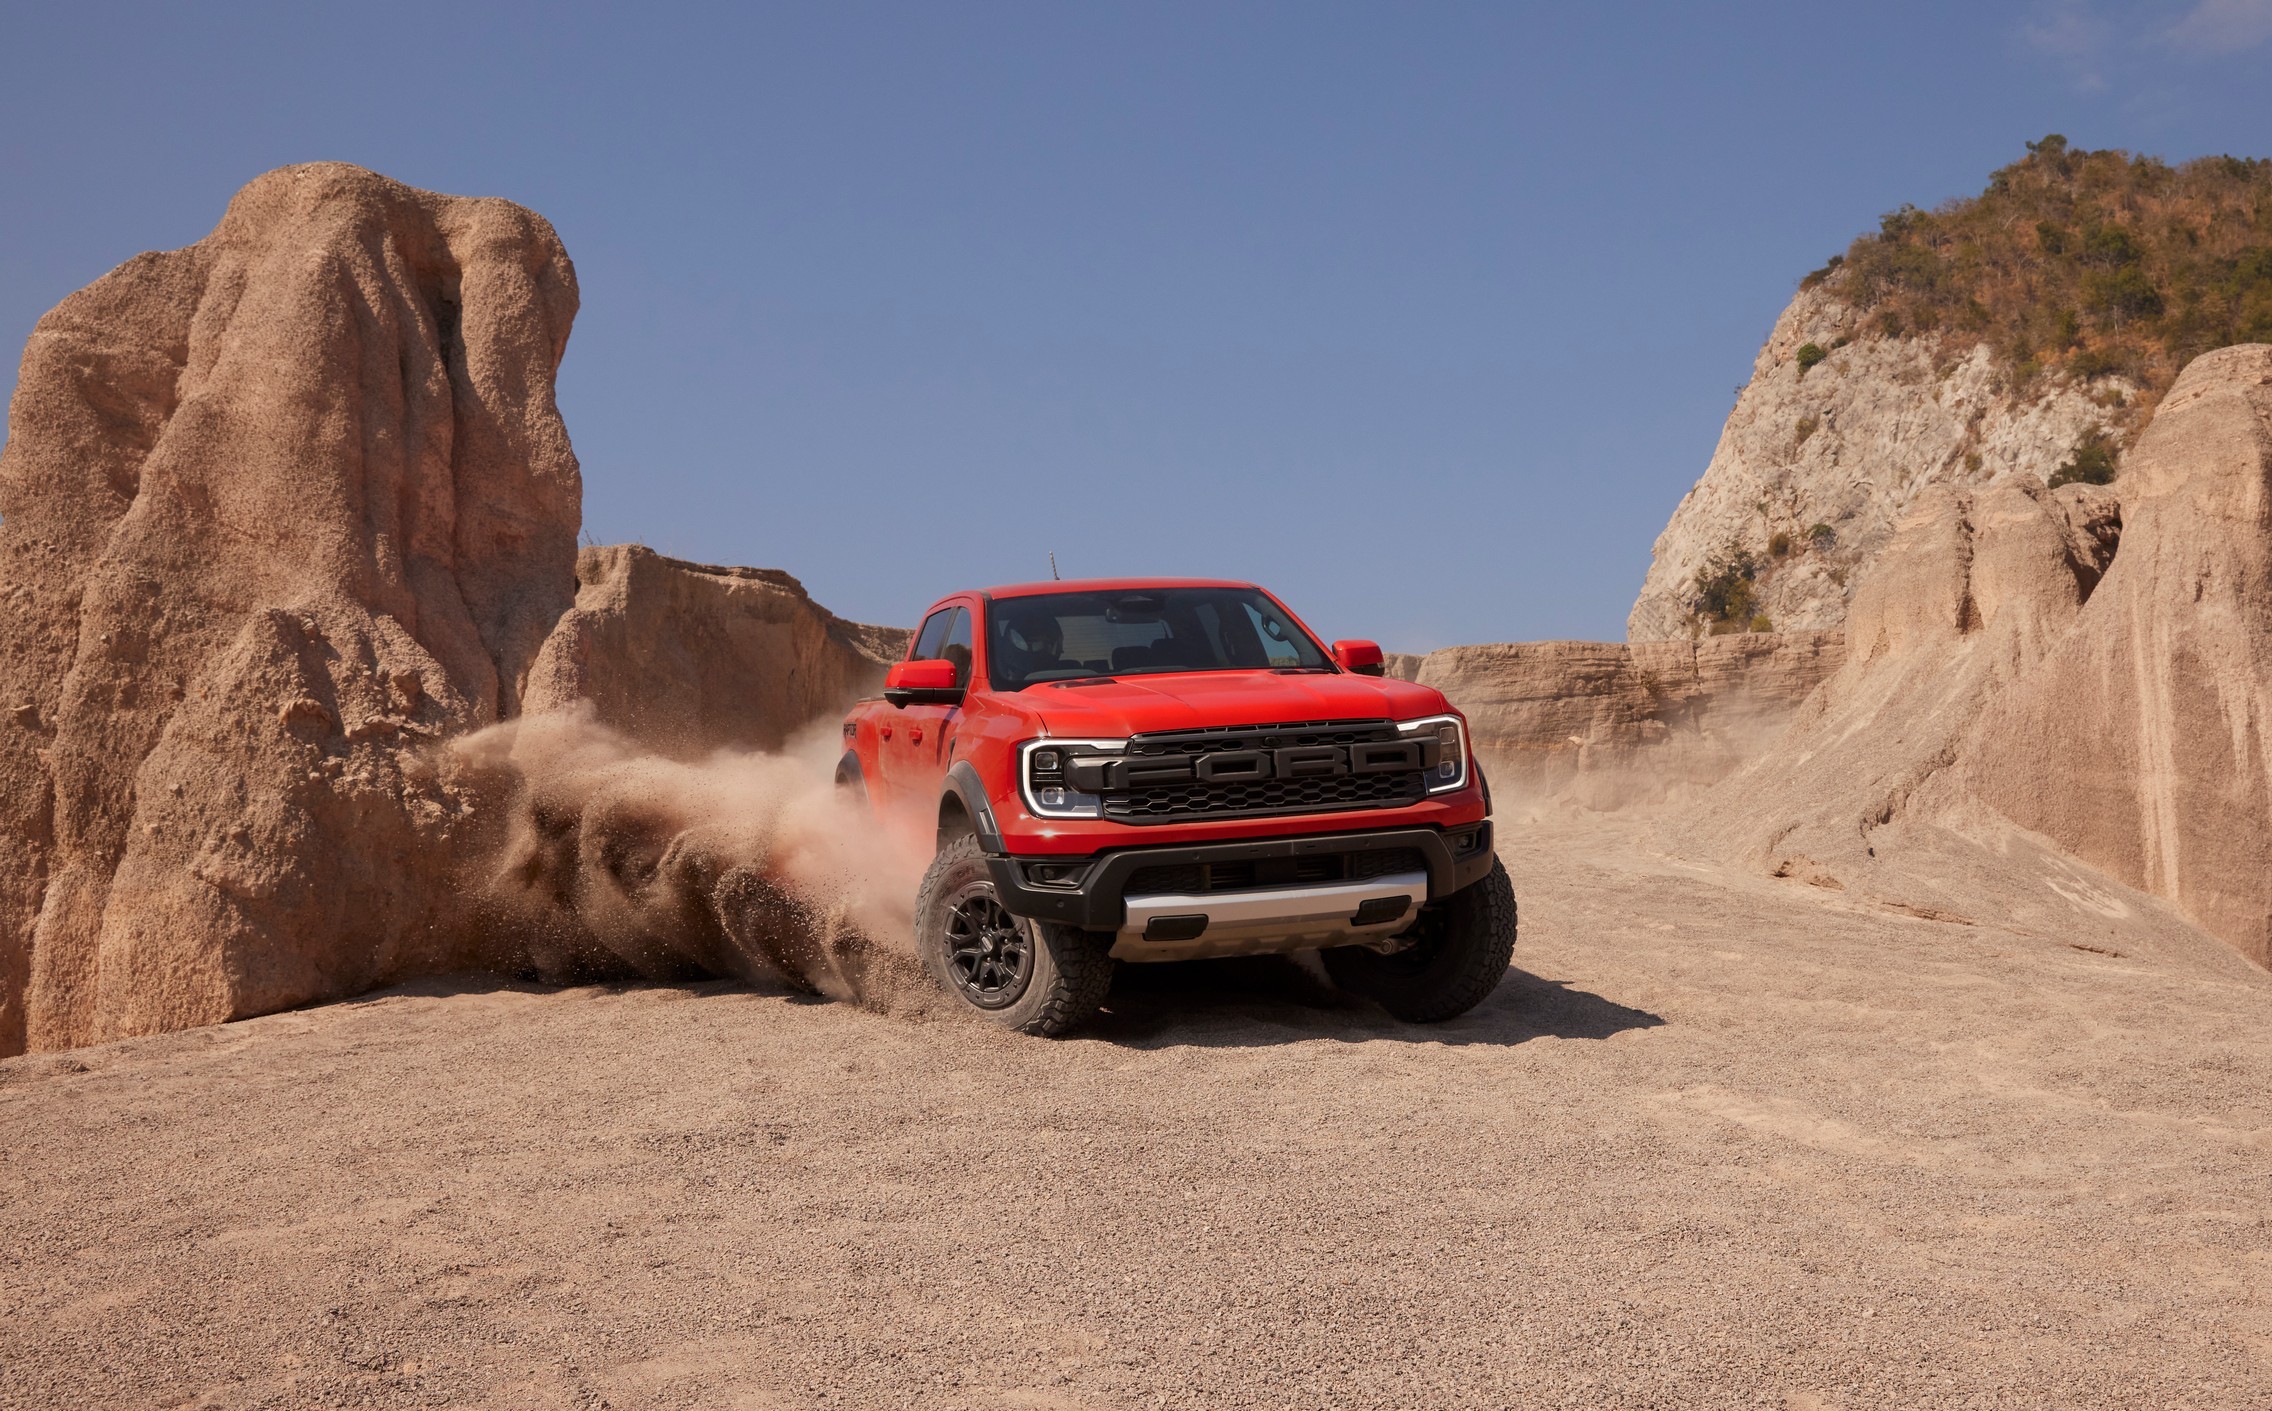 2023 Ford Ranger Raptor Configurator Goes Live in Europe, Priced